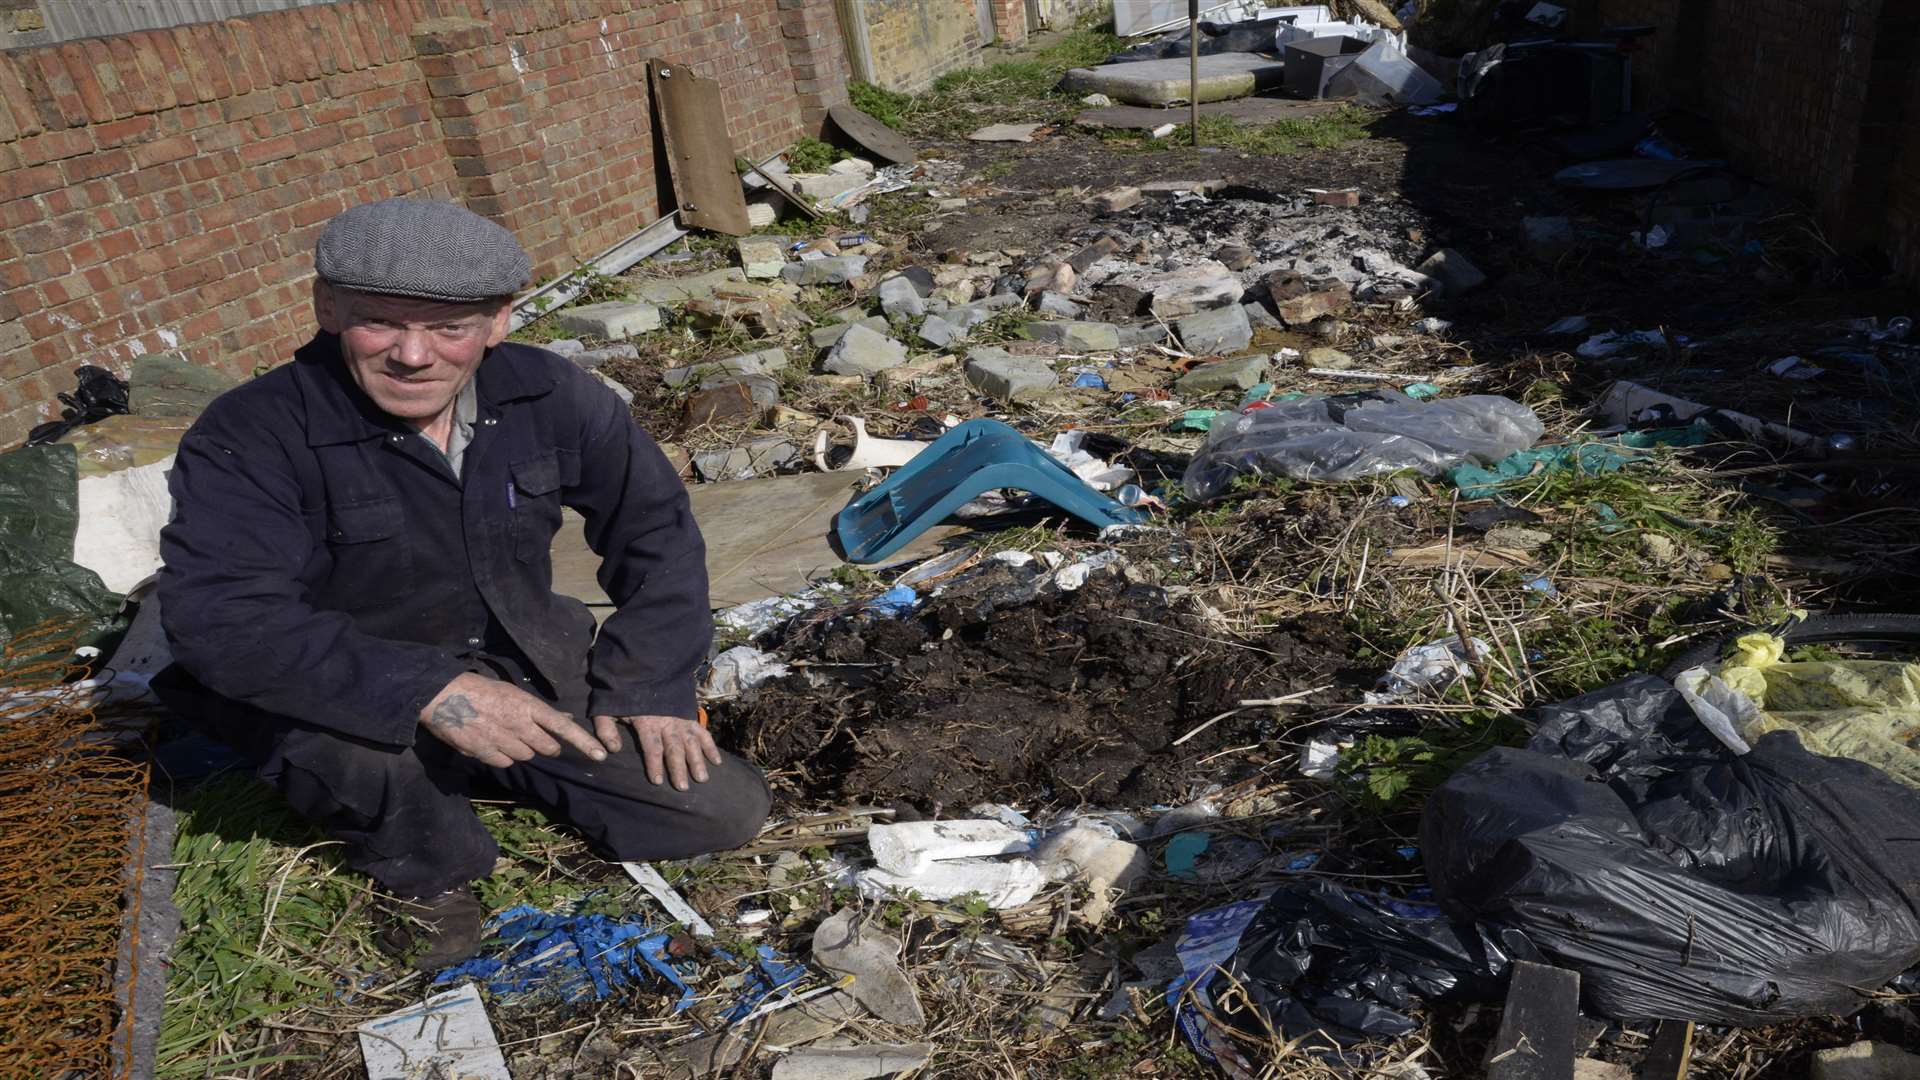 Shaun Smith says flytipping has long been an issue. Picture: Chris Davey